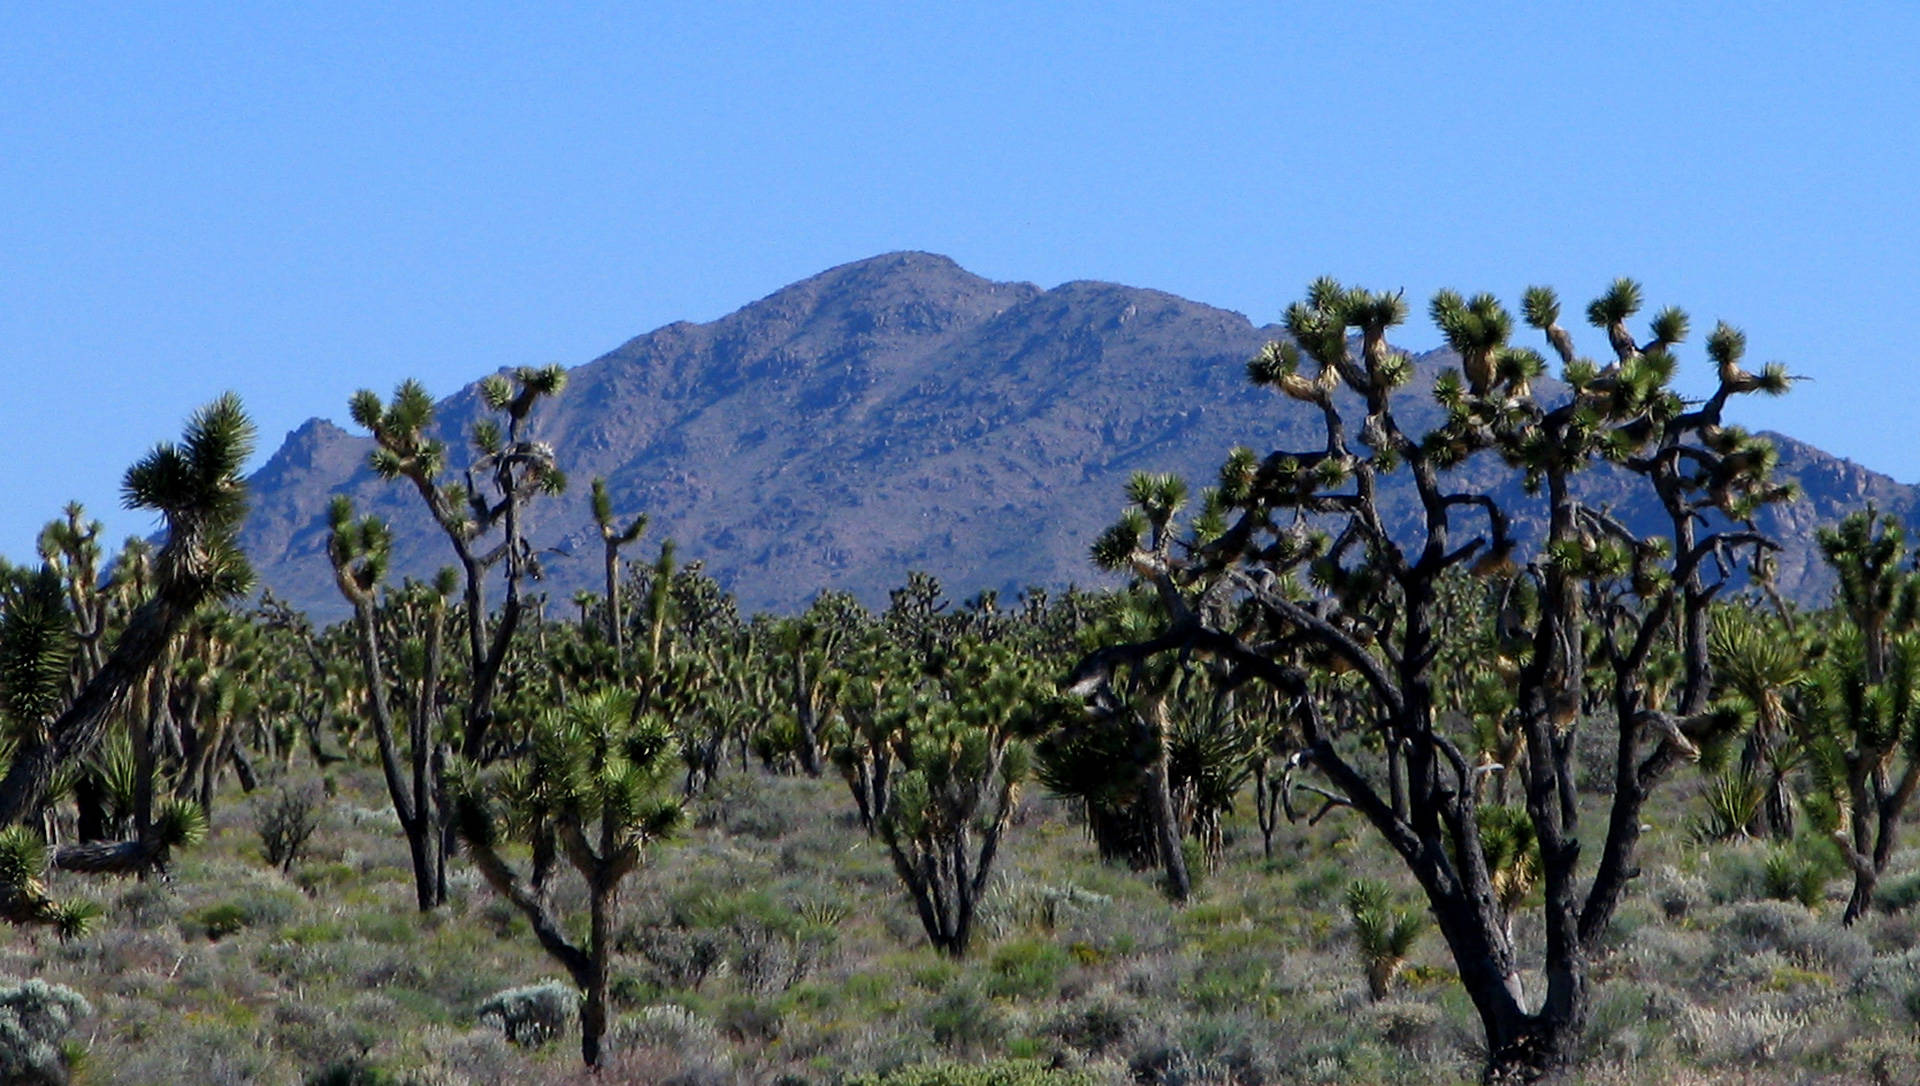 Environmental critics say groundwater pumping could dry up desert springs that plants and wildlife need to survive, especially in Mojave National Preserve and the new Mojave Trails National Preserve. David Dufresne/Flickr